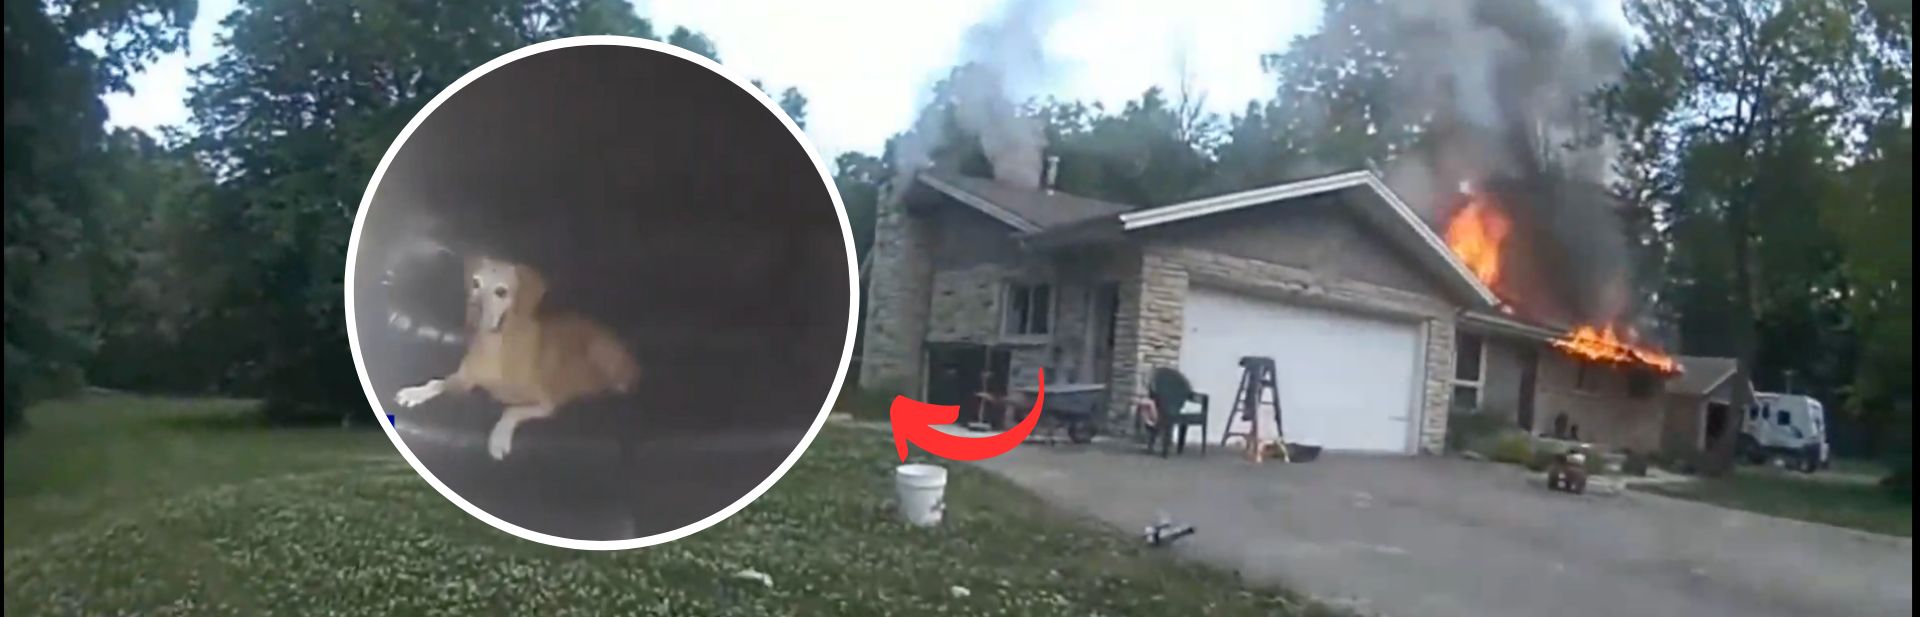 Fearless Officer Dashes Into Burning House To Save Two Trapped Dogs